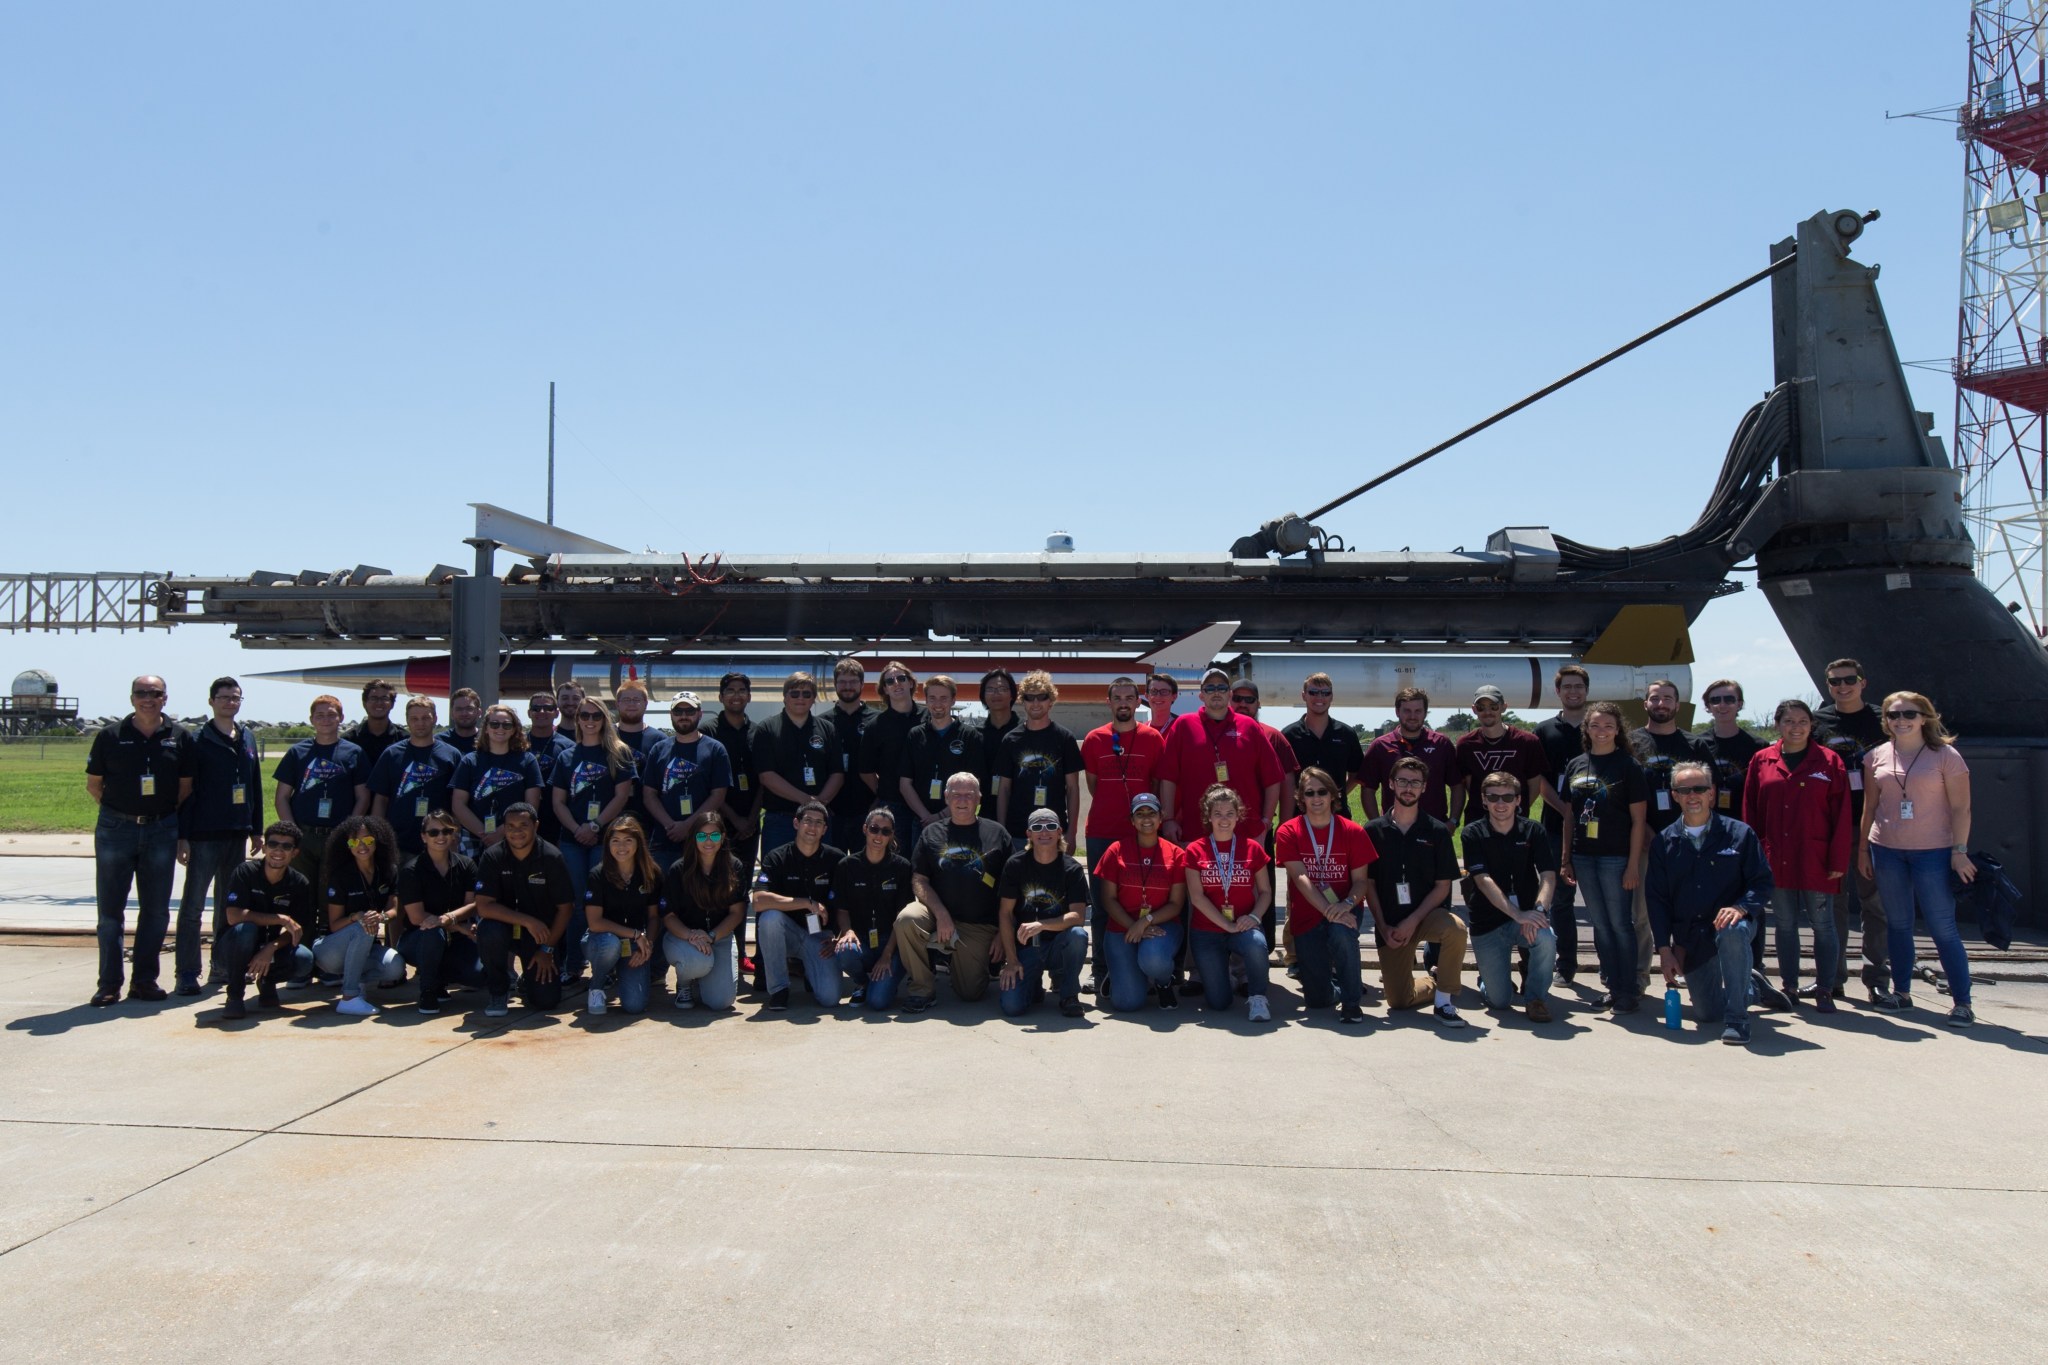 A group of students stands in front of a sounding rocket horizontal on its launch pad.